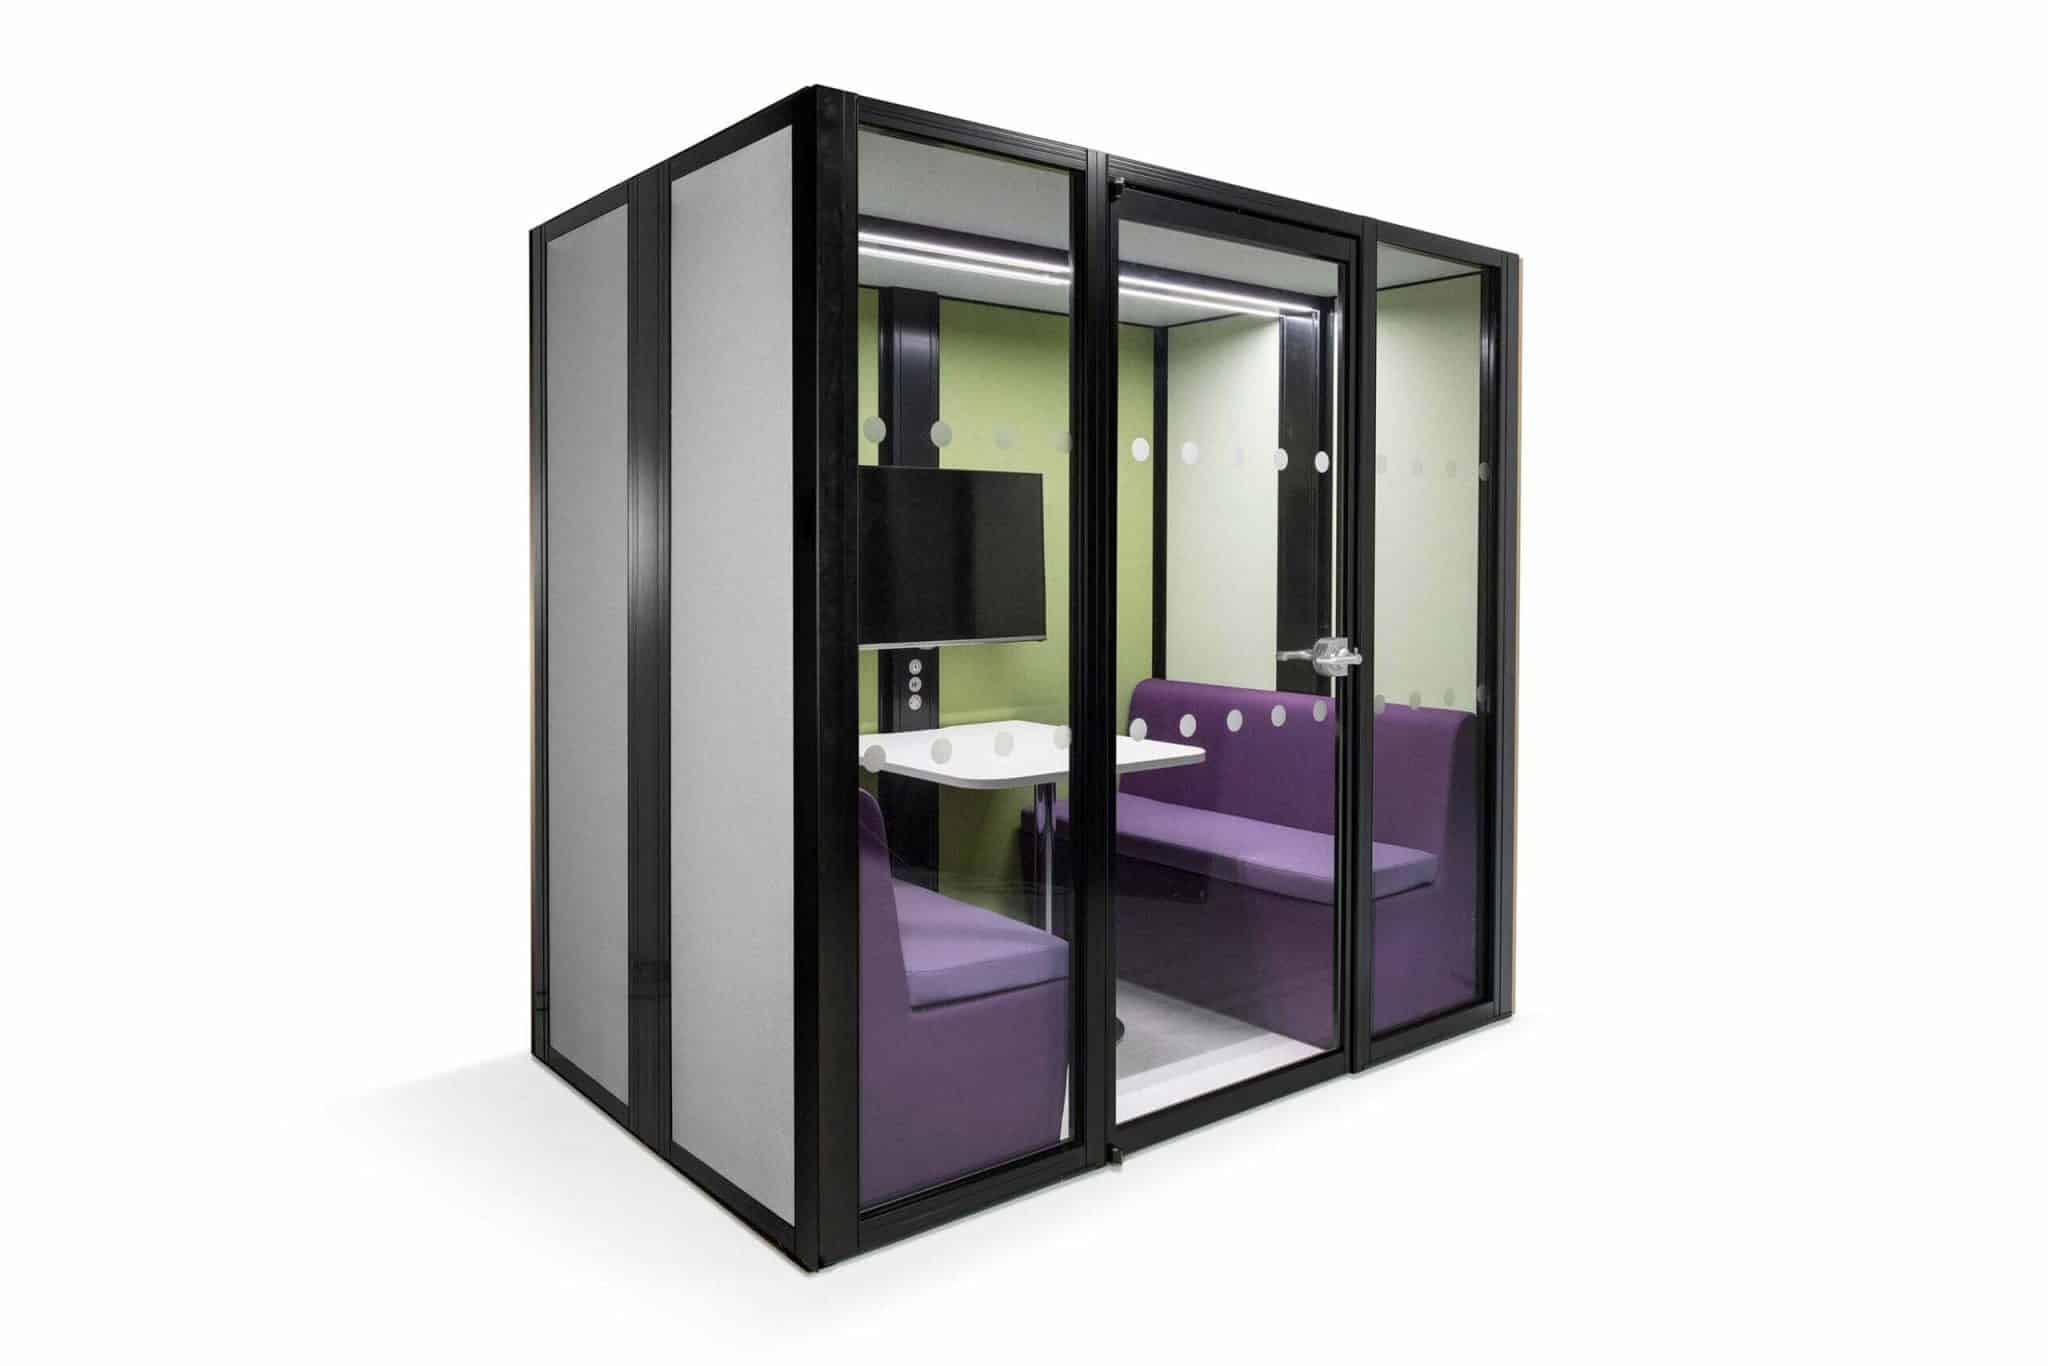 Hoozone Greet Pod shown with exterior fabirc panels and glazed front